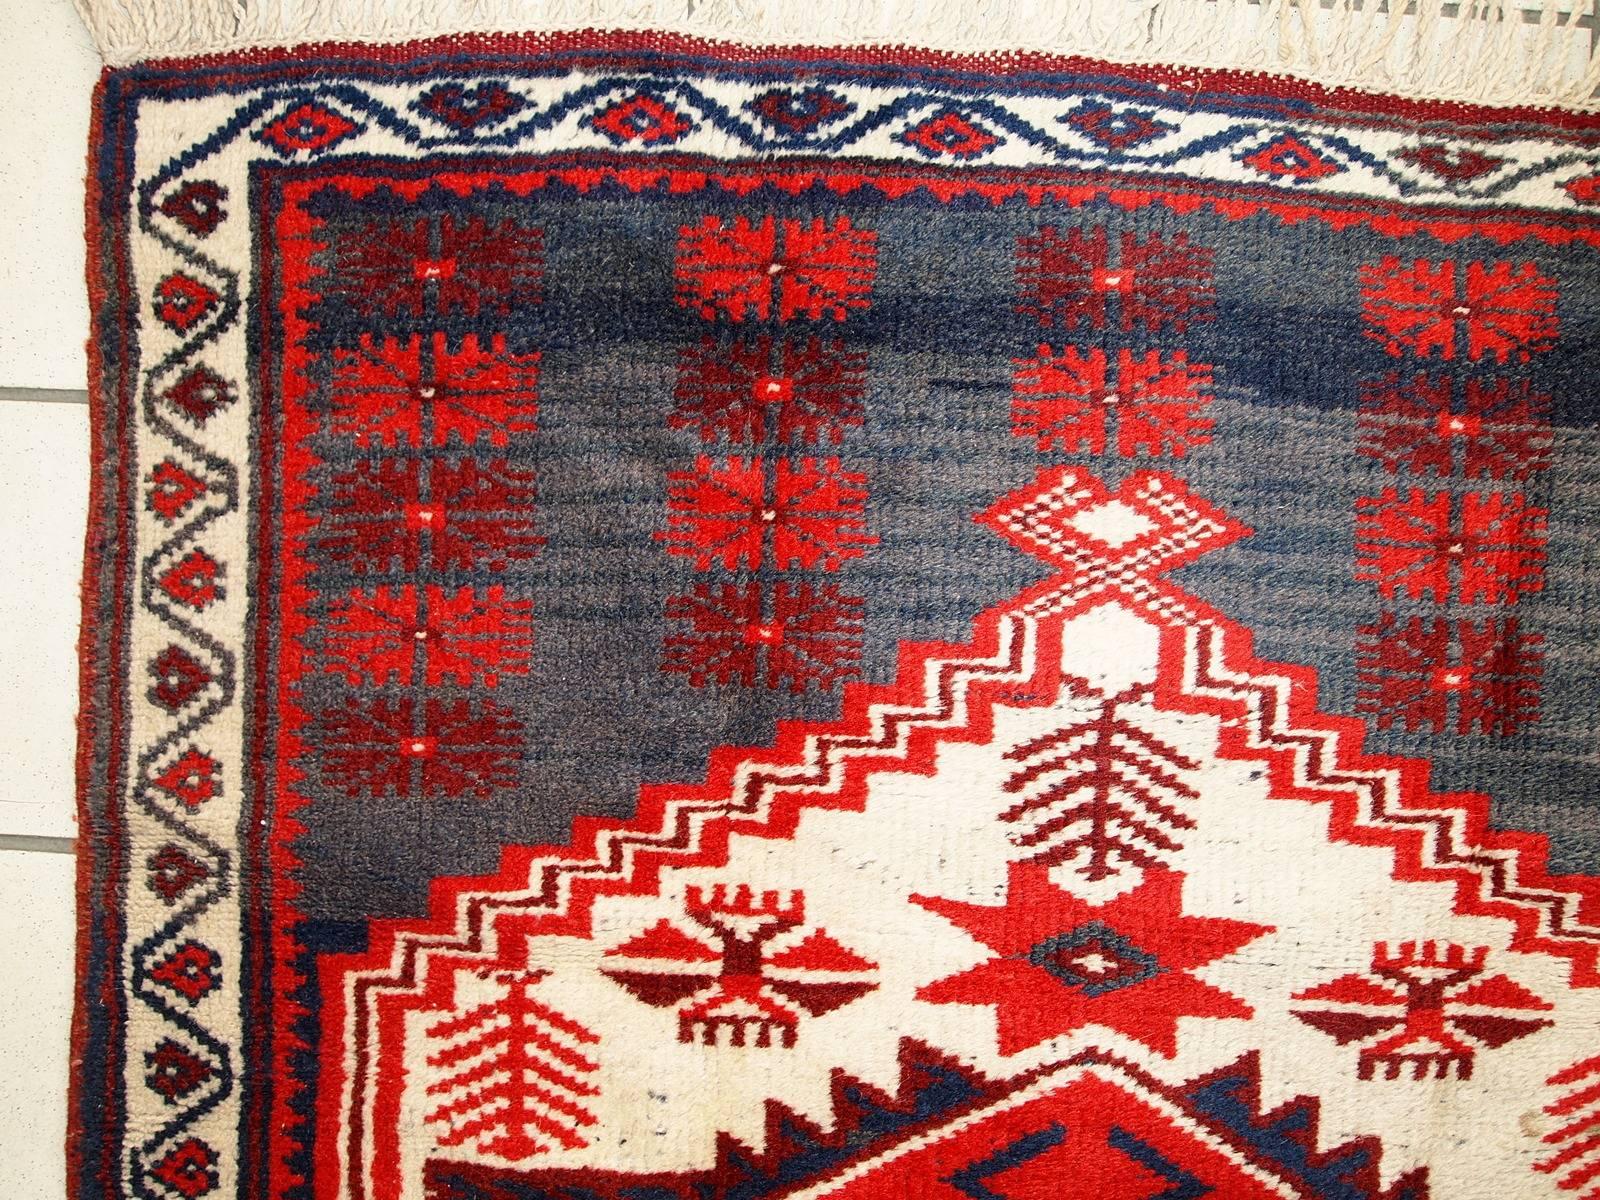 Antique Turkish Anatolian rug in original condition. The rug has traditional Anatolian design with the large diamond shaped medallion in the center in white color. Background color divided in two (abrash) navy blue and grayish shade. Geometric